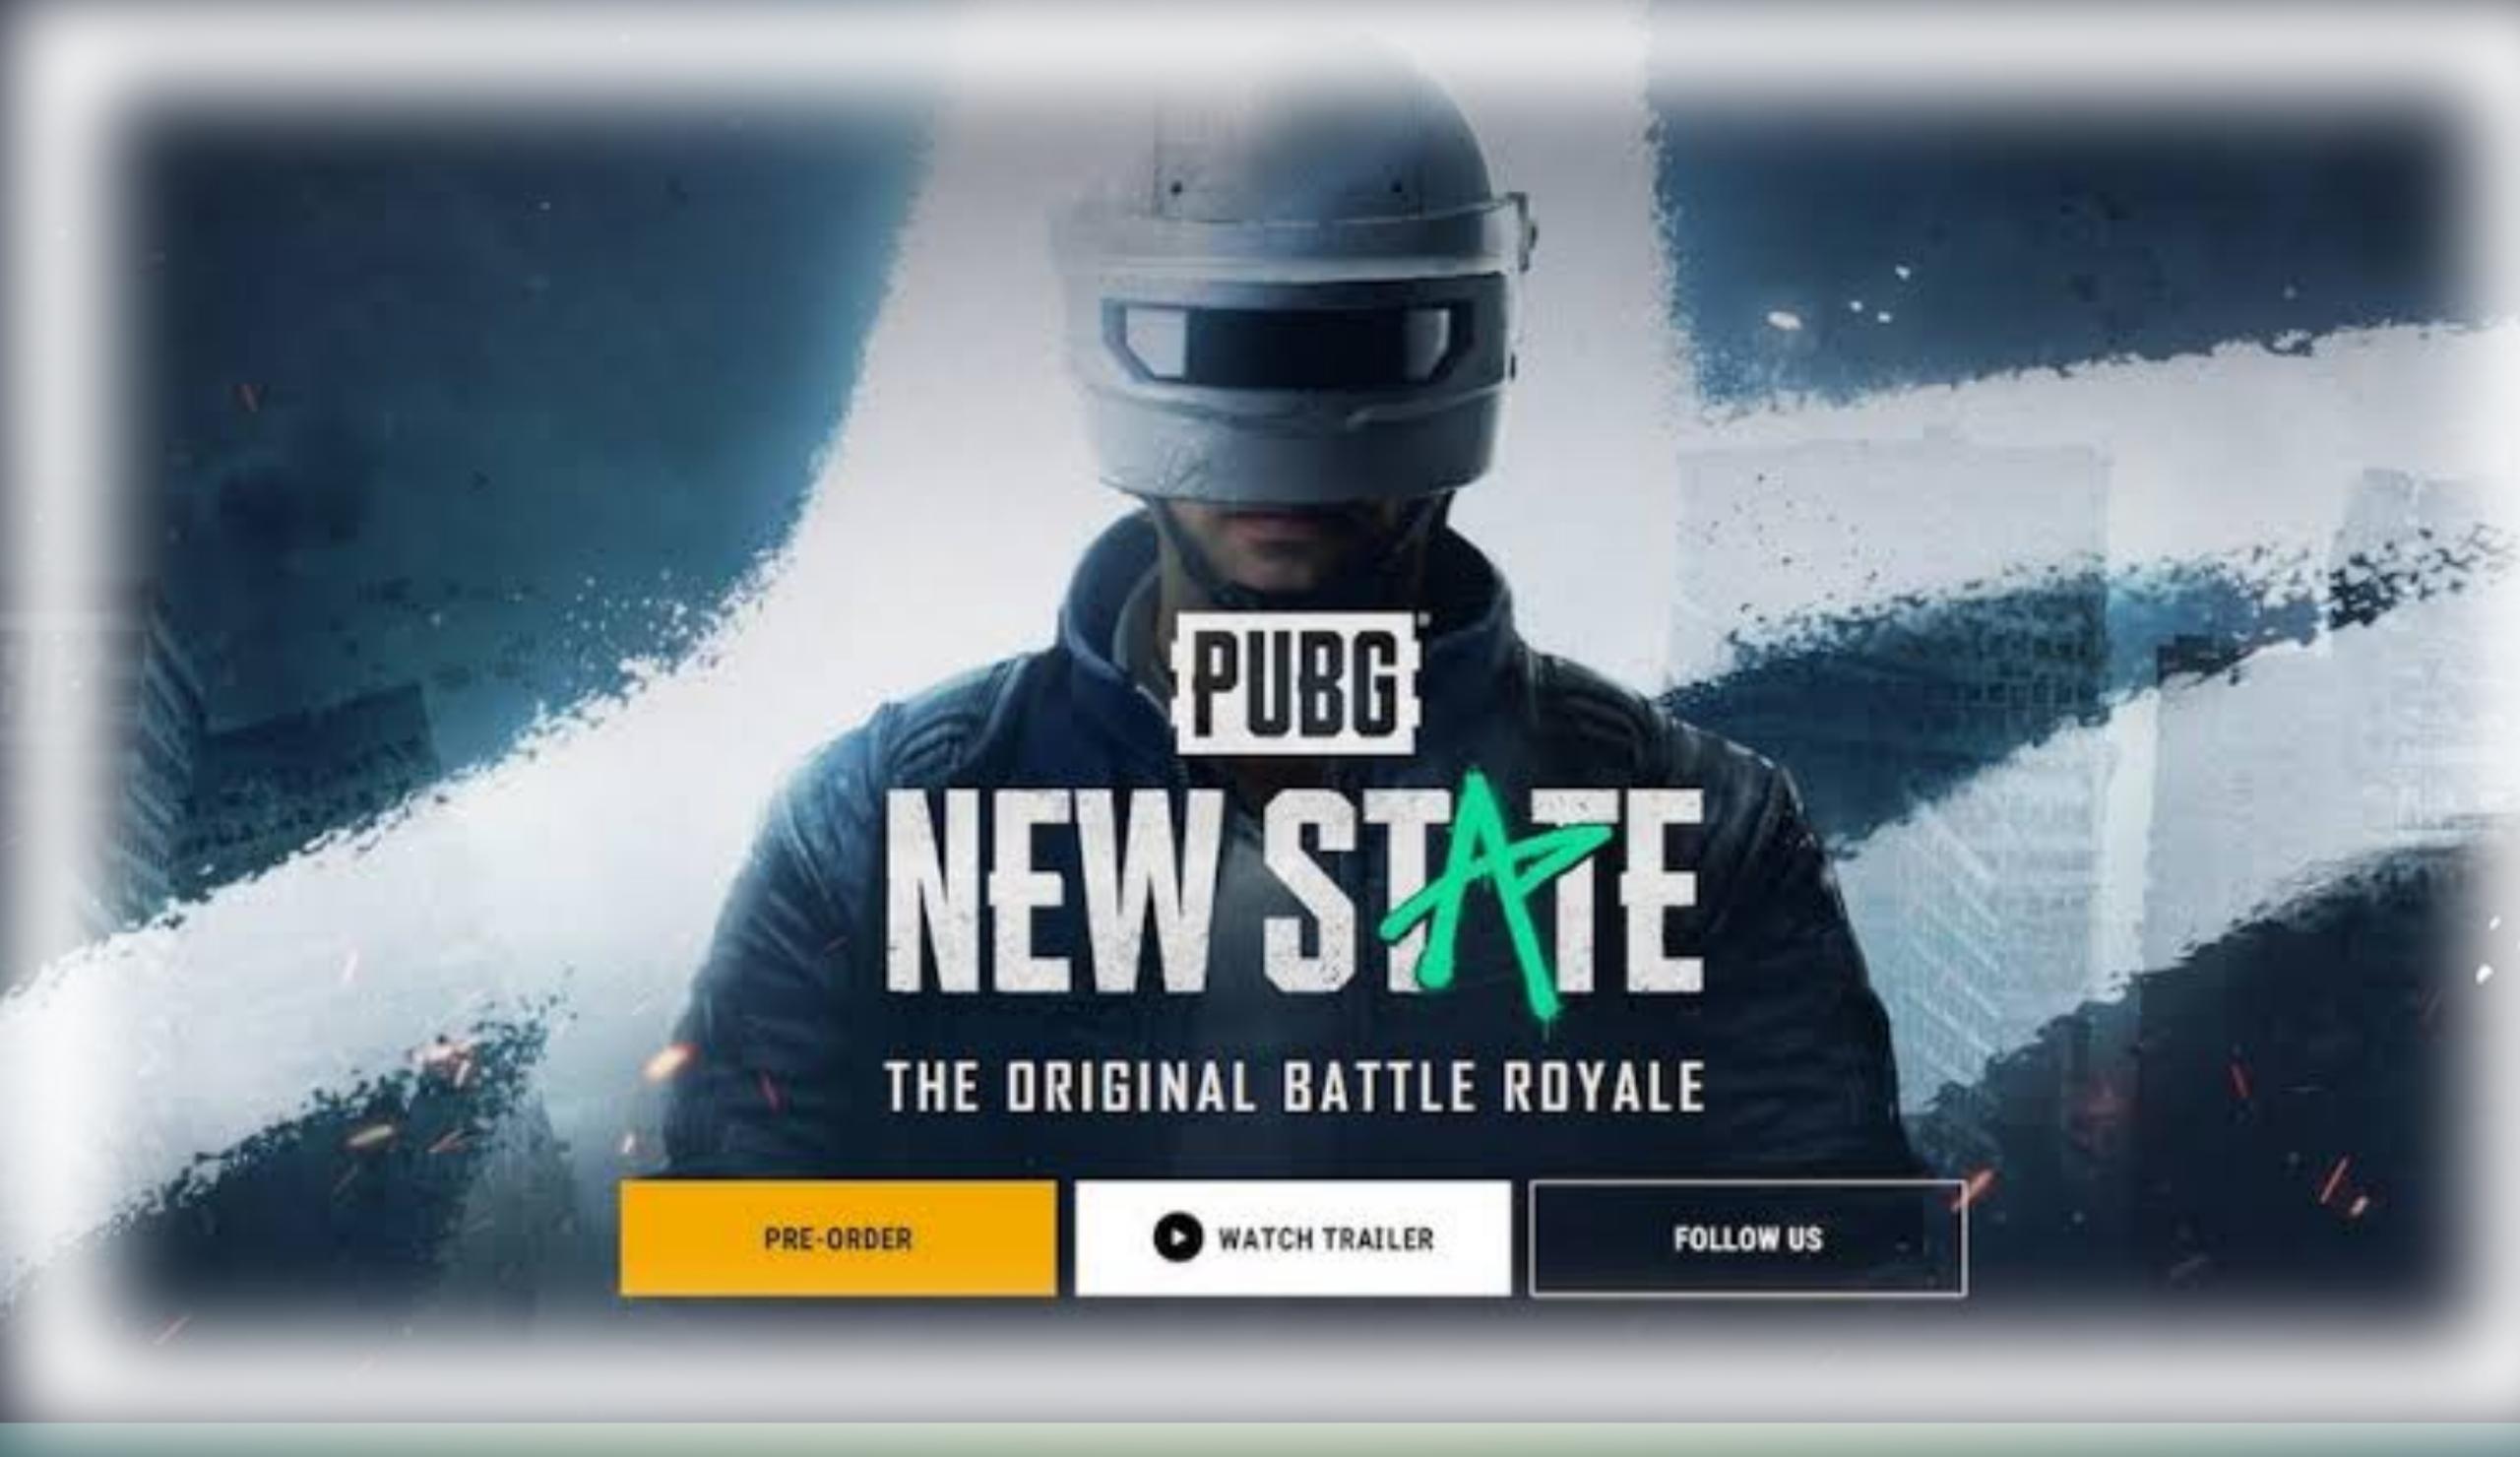 Pubg New State for Android - APK Download